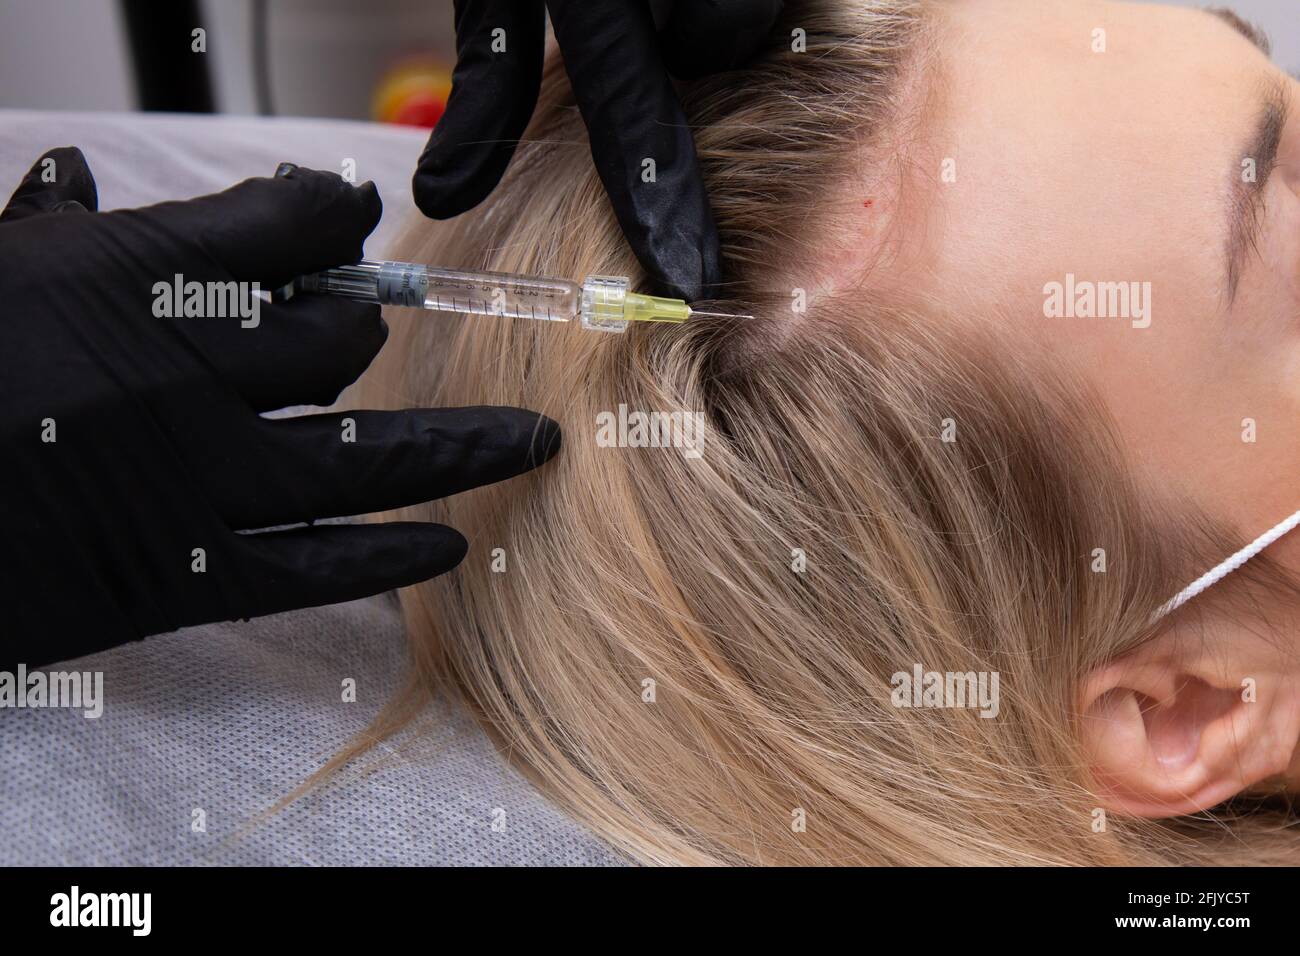 A blonde woman with dyed hair suffers from hair loss and receives mesotherapy injections in her head. Hair restoration concept Stock Photo